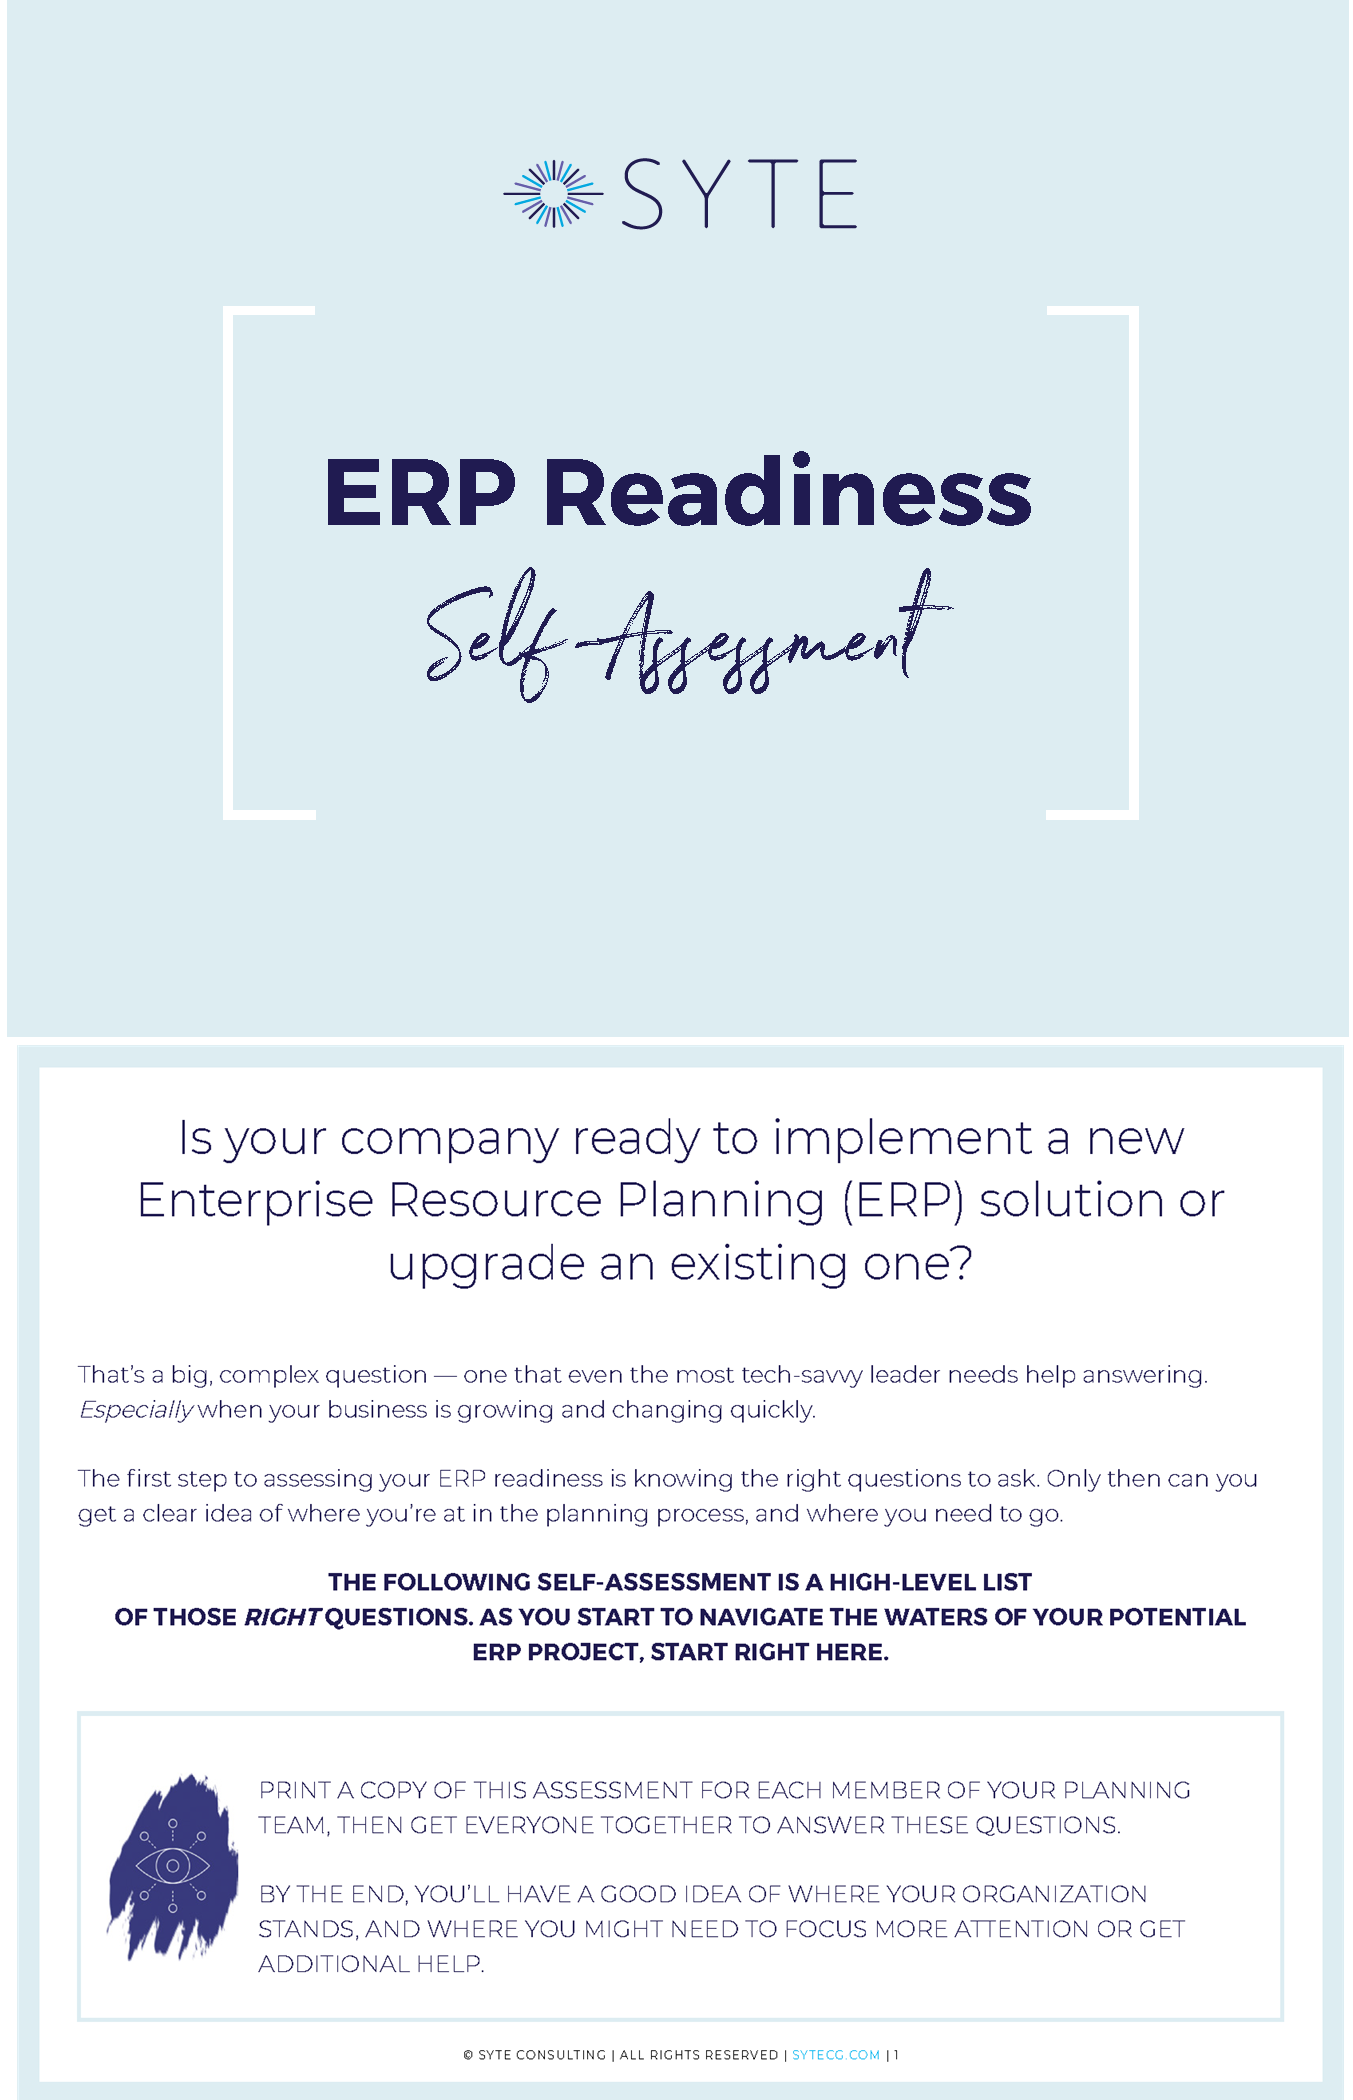 SYTE ERP Readiness Self Assessment guide